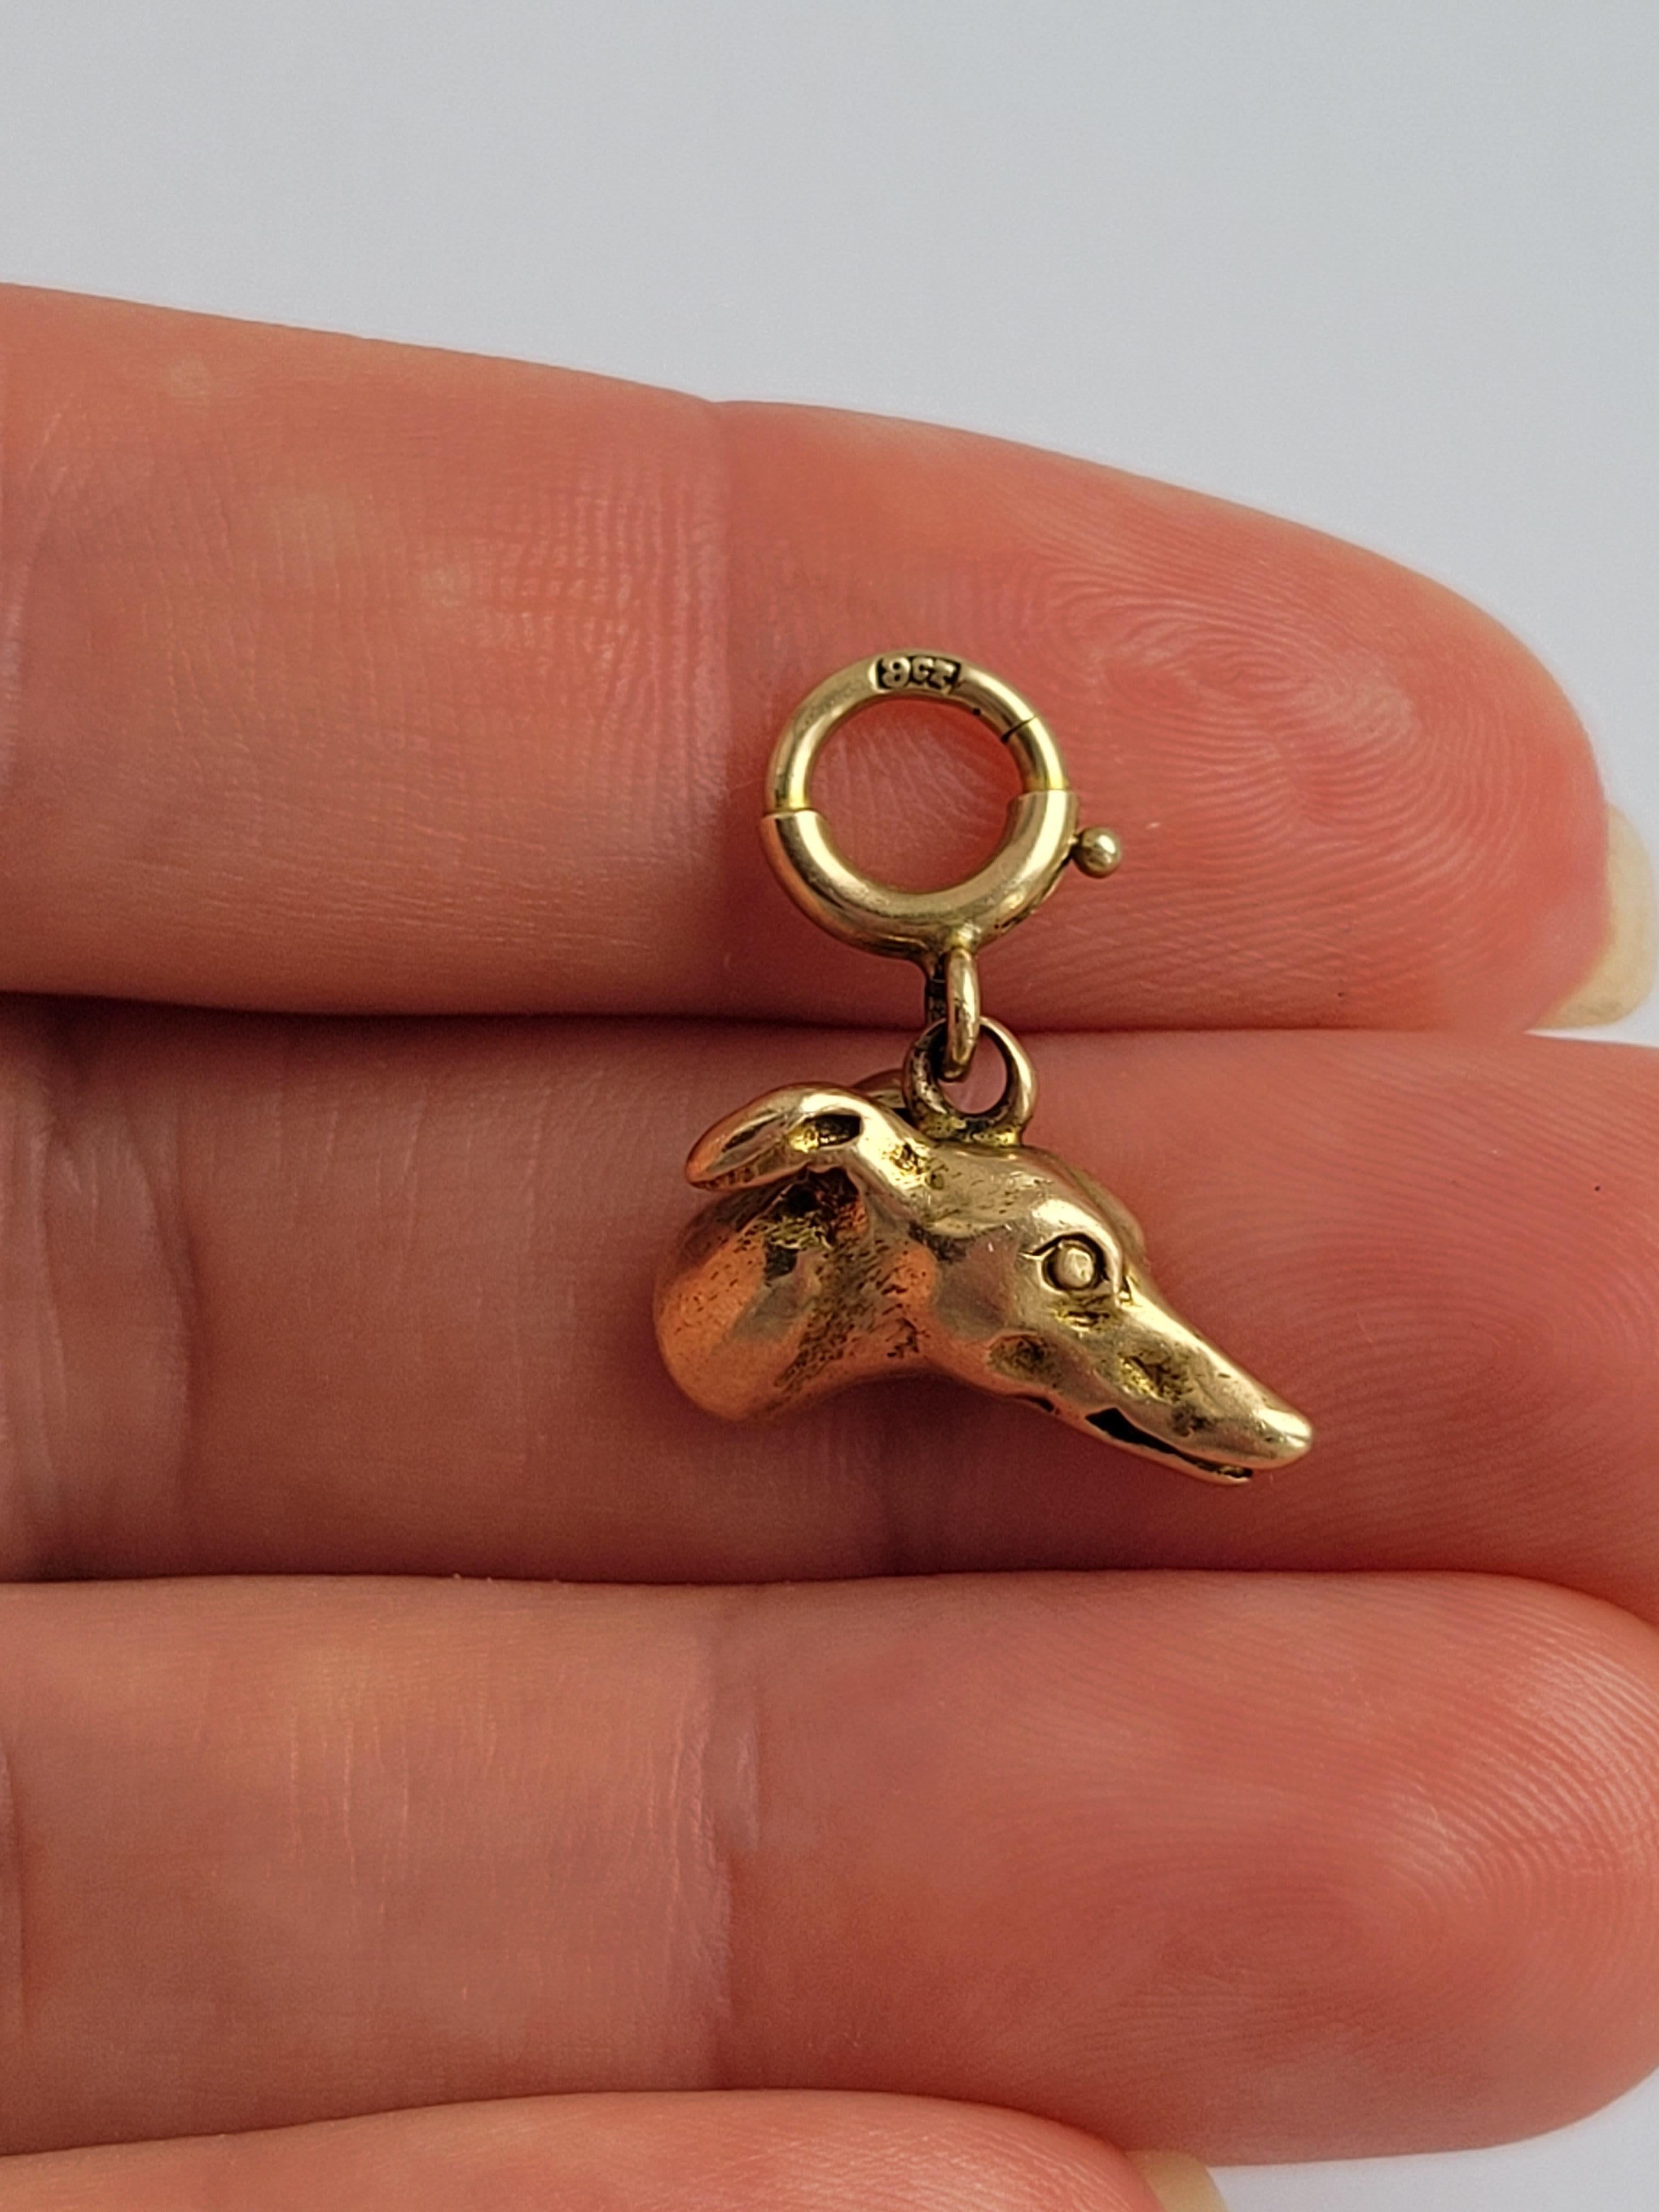 A highly detailed Antique Victorian c.1890s Rose Gold Greyhound head pendant / charm. The charm well solid made (not hollow). A perfect gift for dog lover or charm collector. English origin.
Total drop including bolt ring 20mm, width 16mm.
Weight